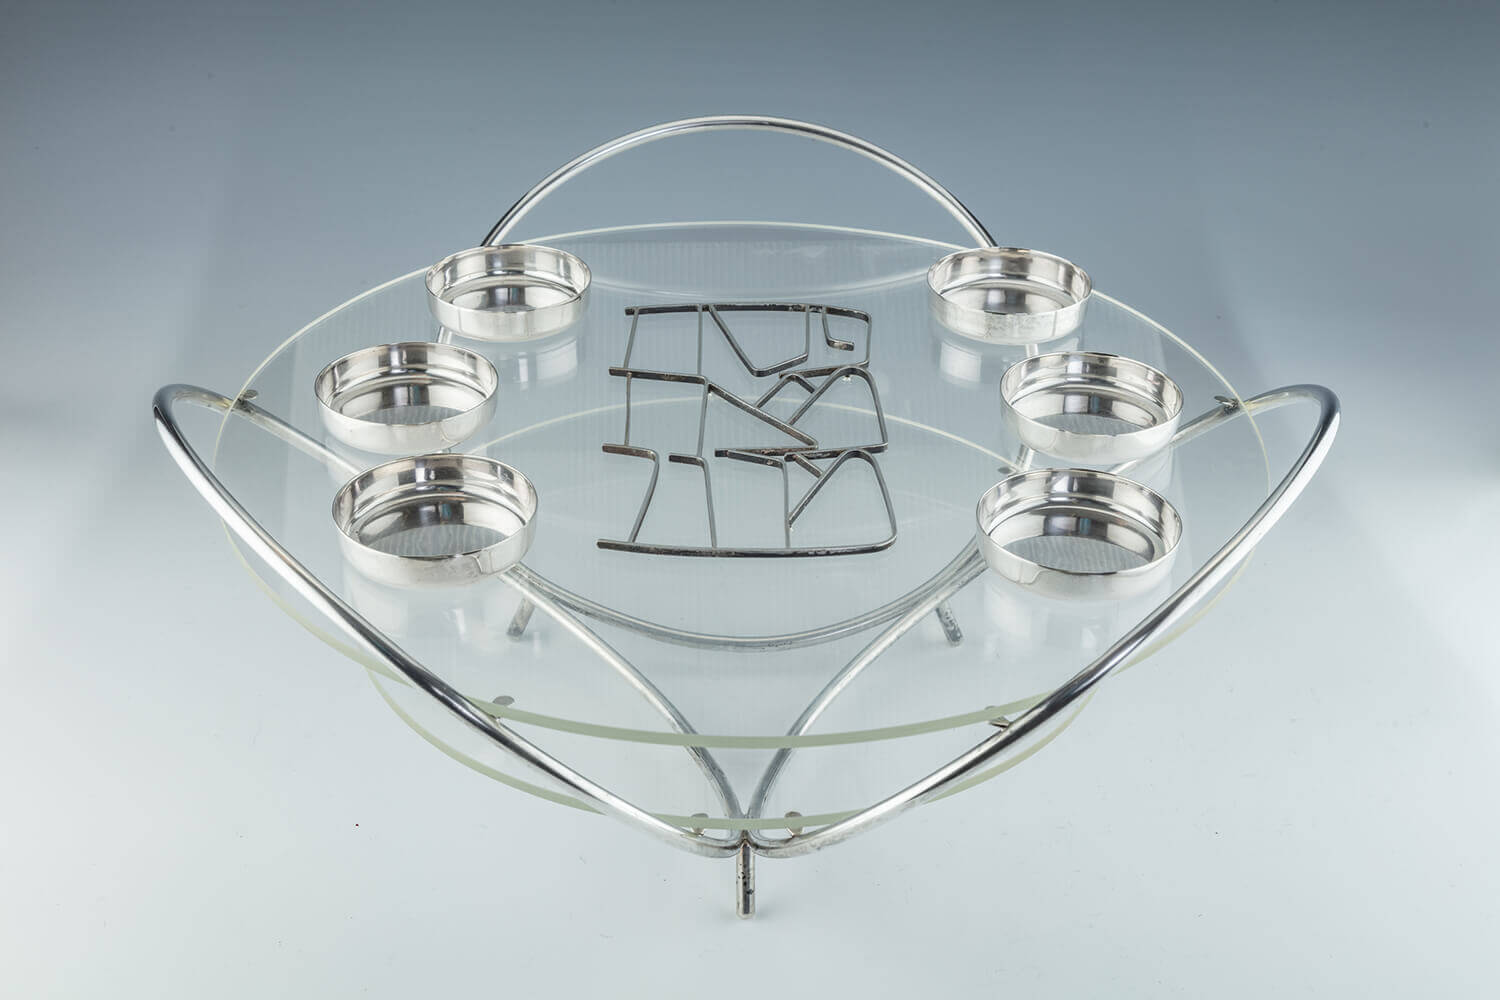 146. A STERLING SILVER AND PLEXIGLASS SEDER EQUIPPAGE BY MOSHE ZABARI